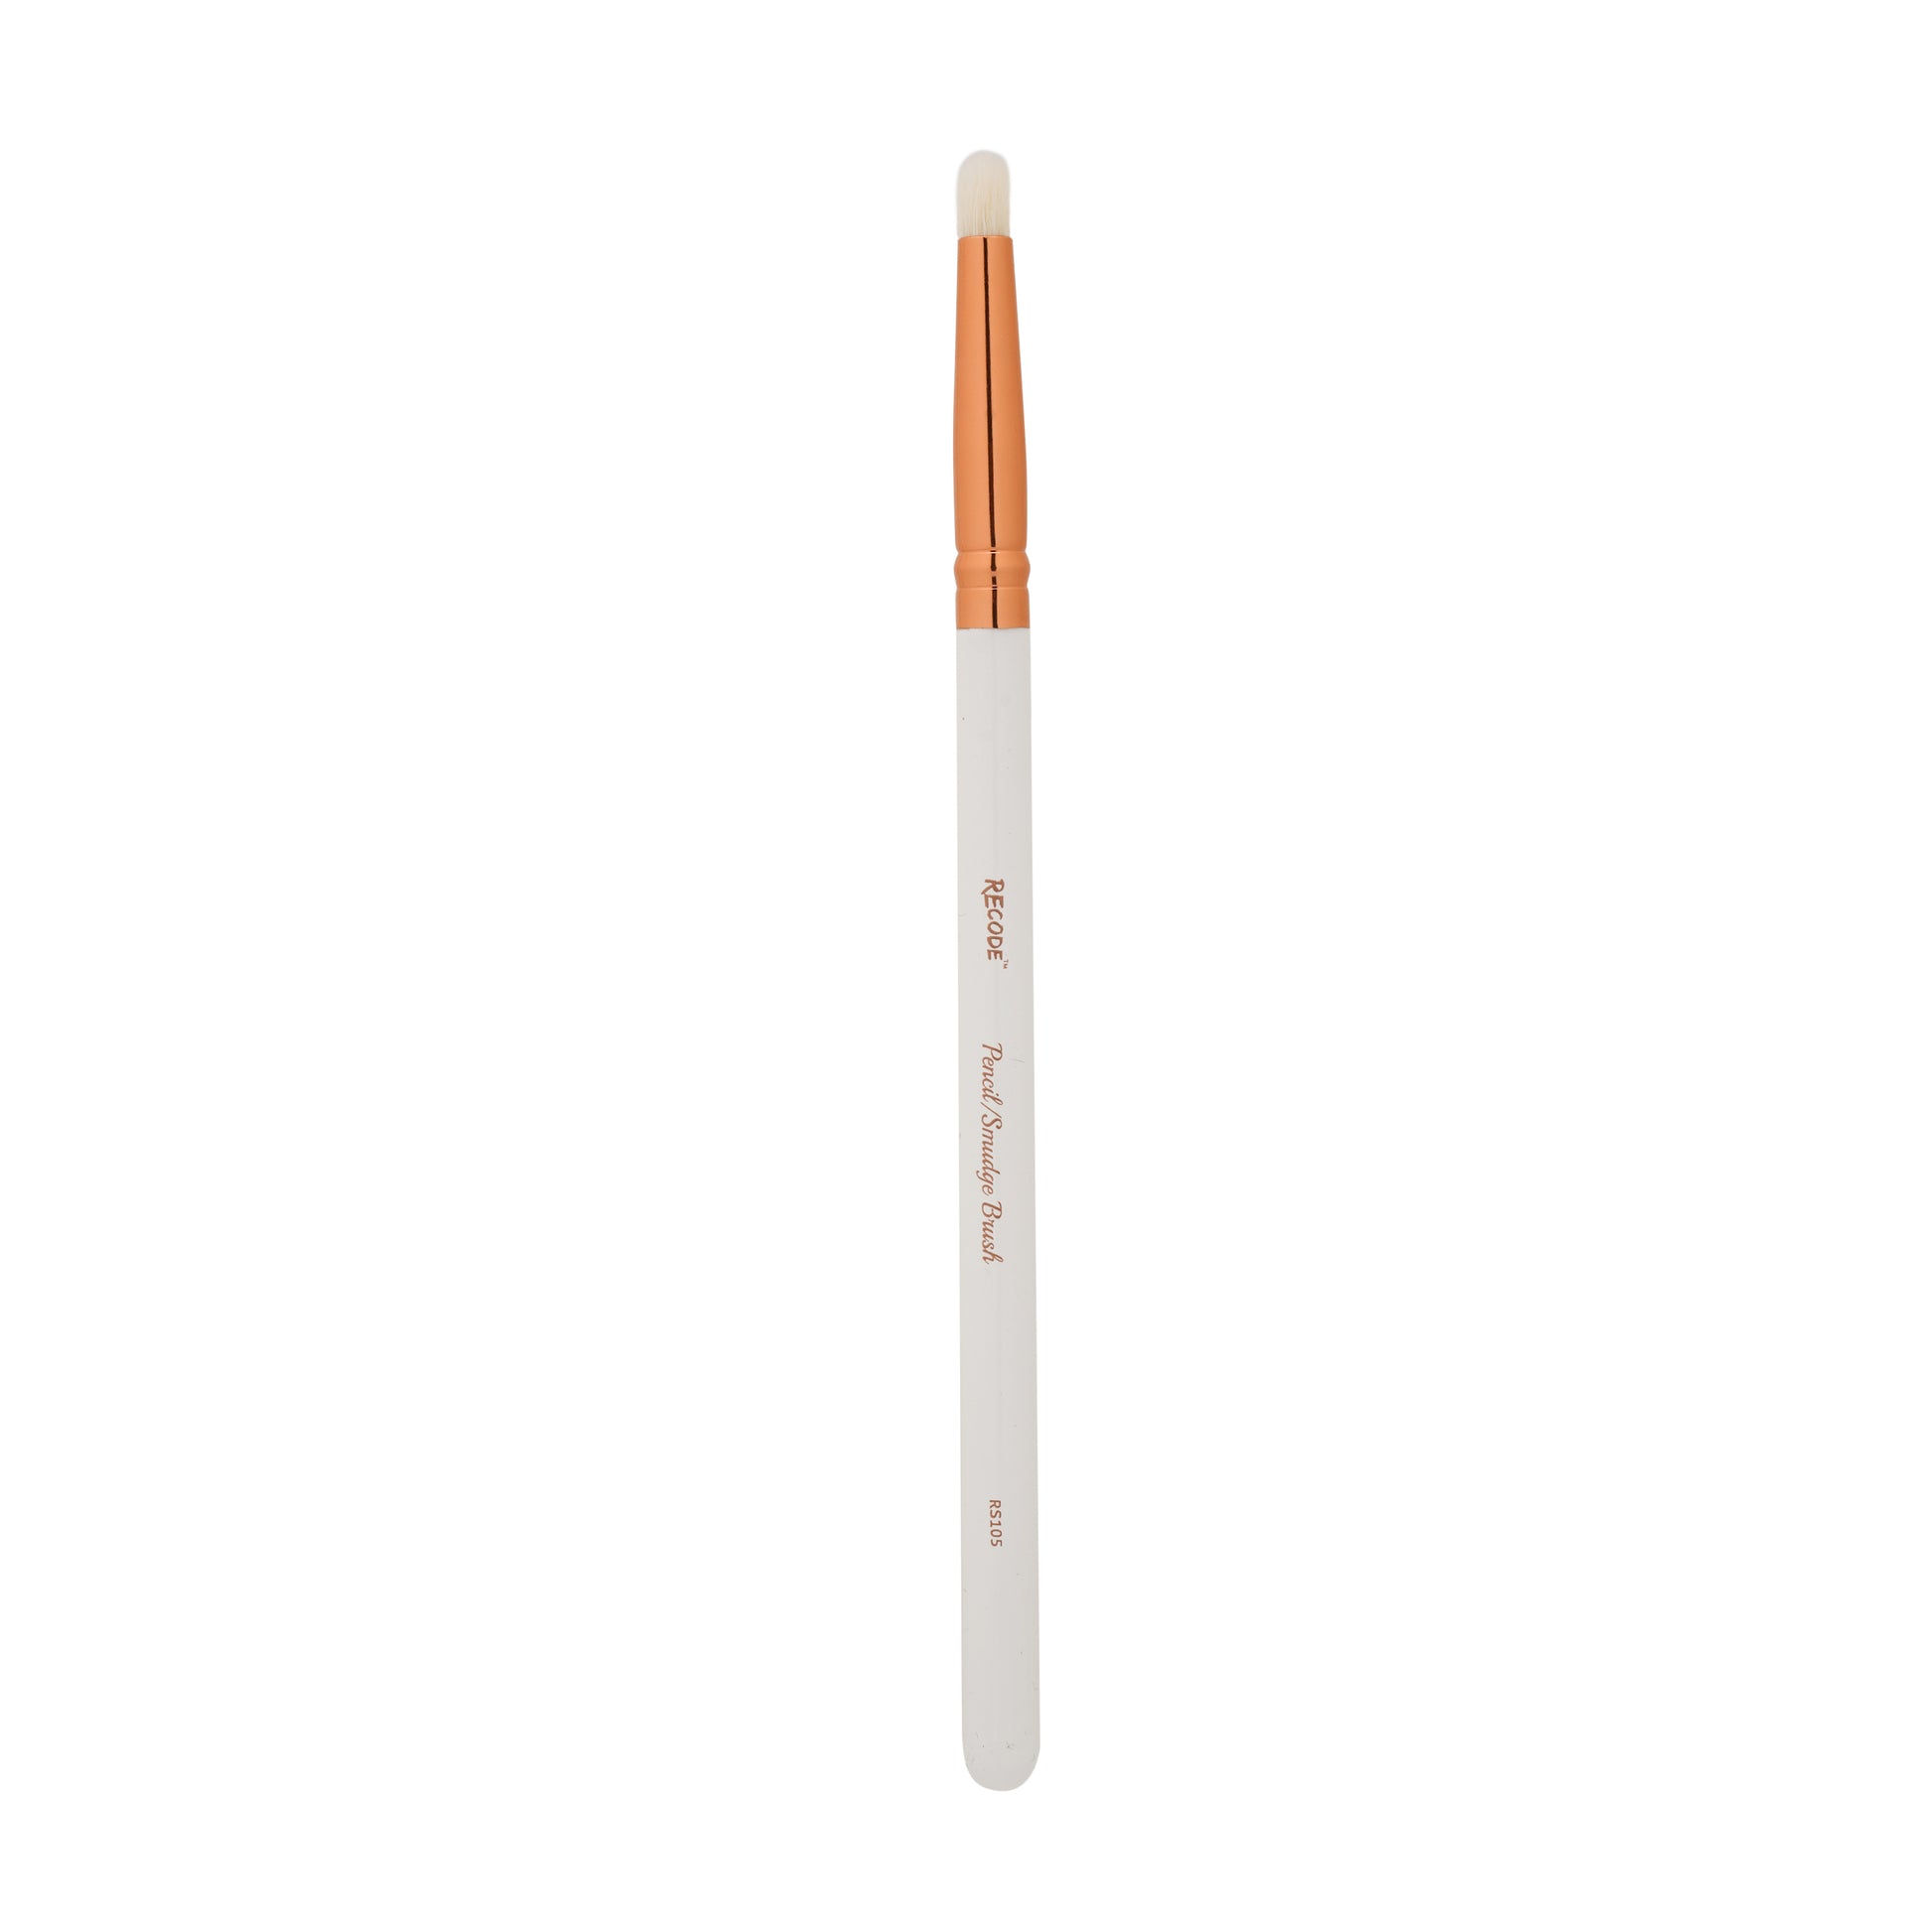 PENCIL SMUDGE Brush - RECODE RS 105